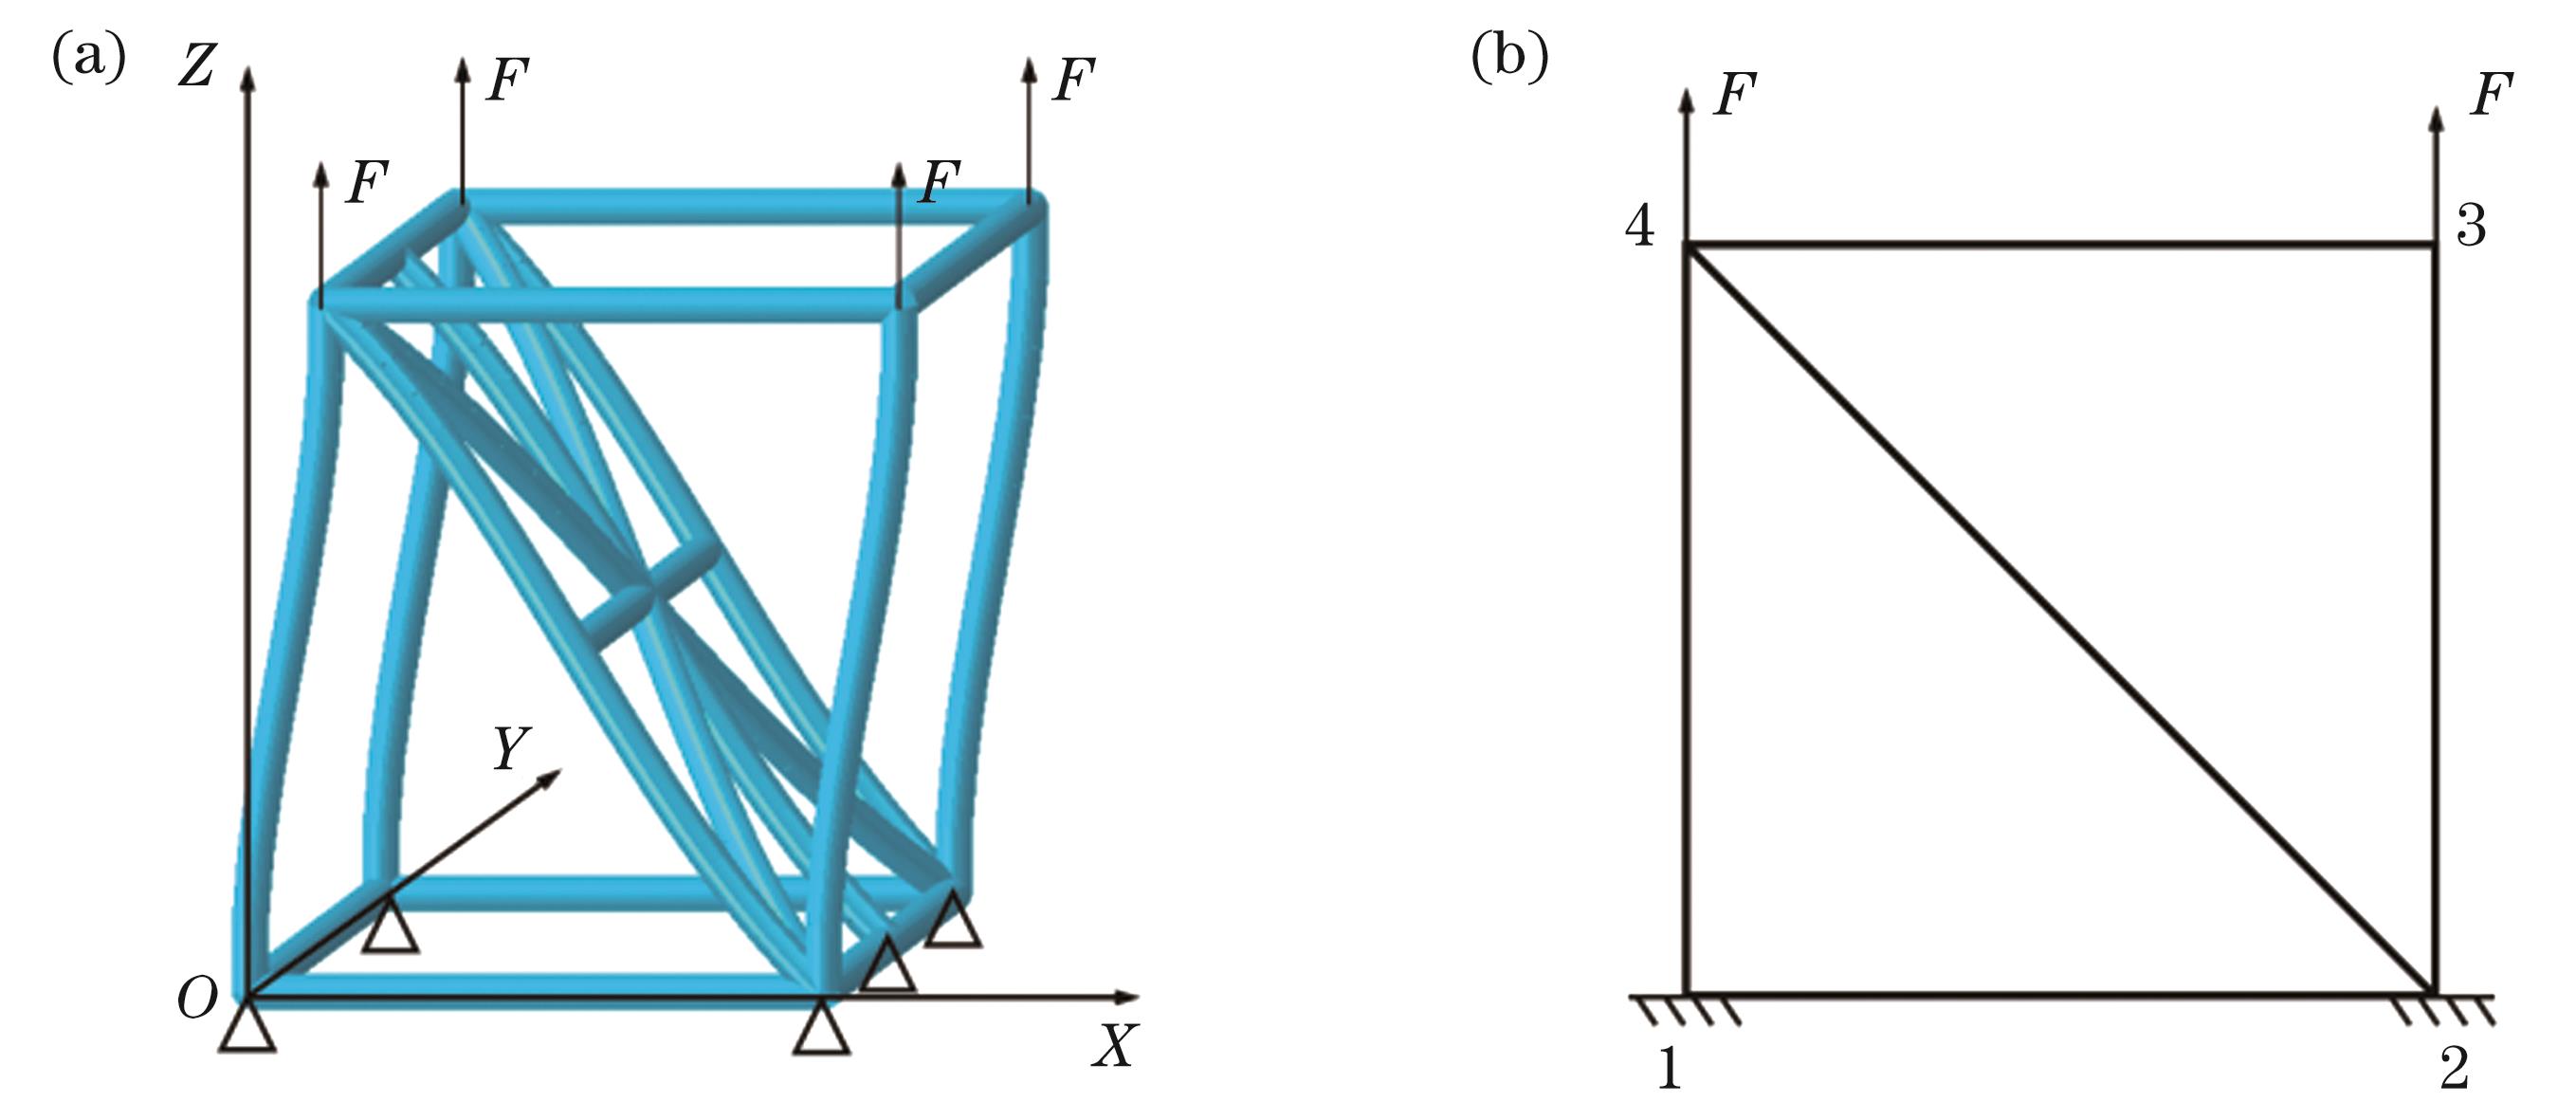 Tension‒shear-coupled deformation of the unit-cell. (a) Deformation model of the unit-cell; (b) planar rigid frame after simplification of the unit-cell